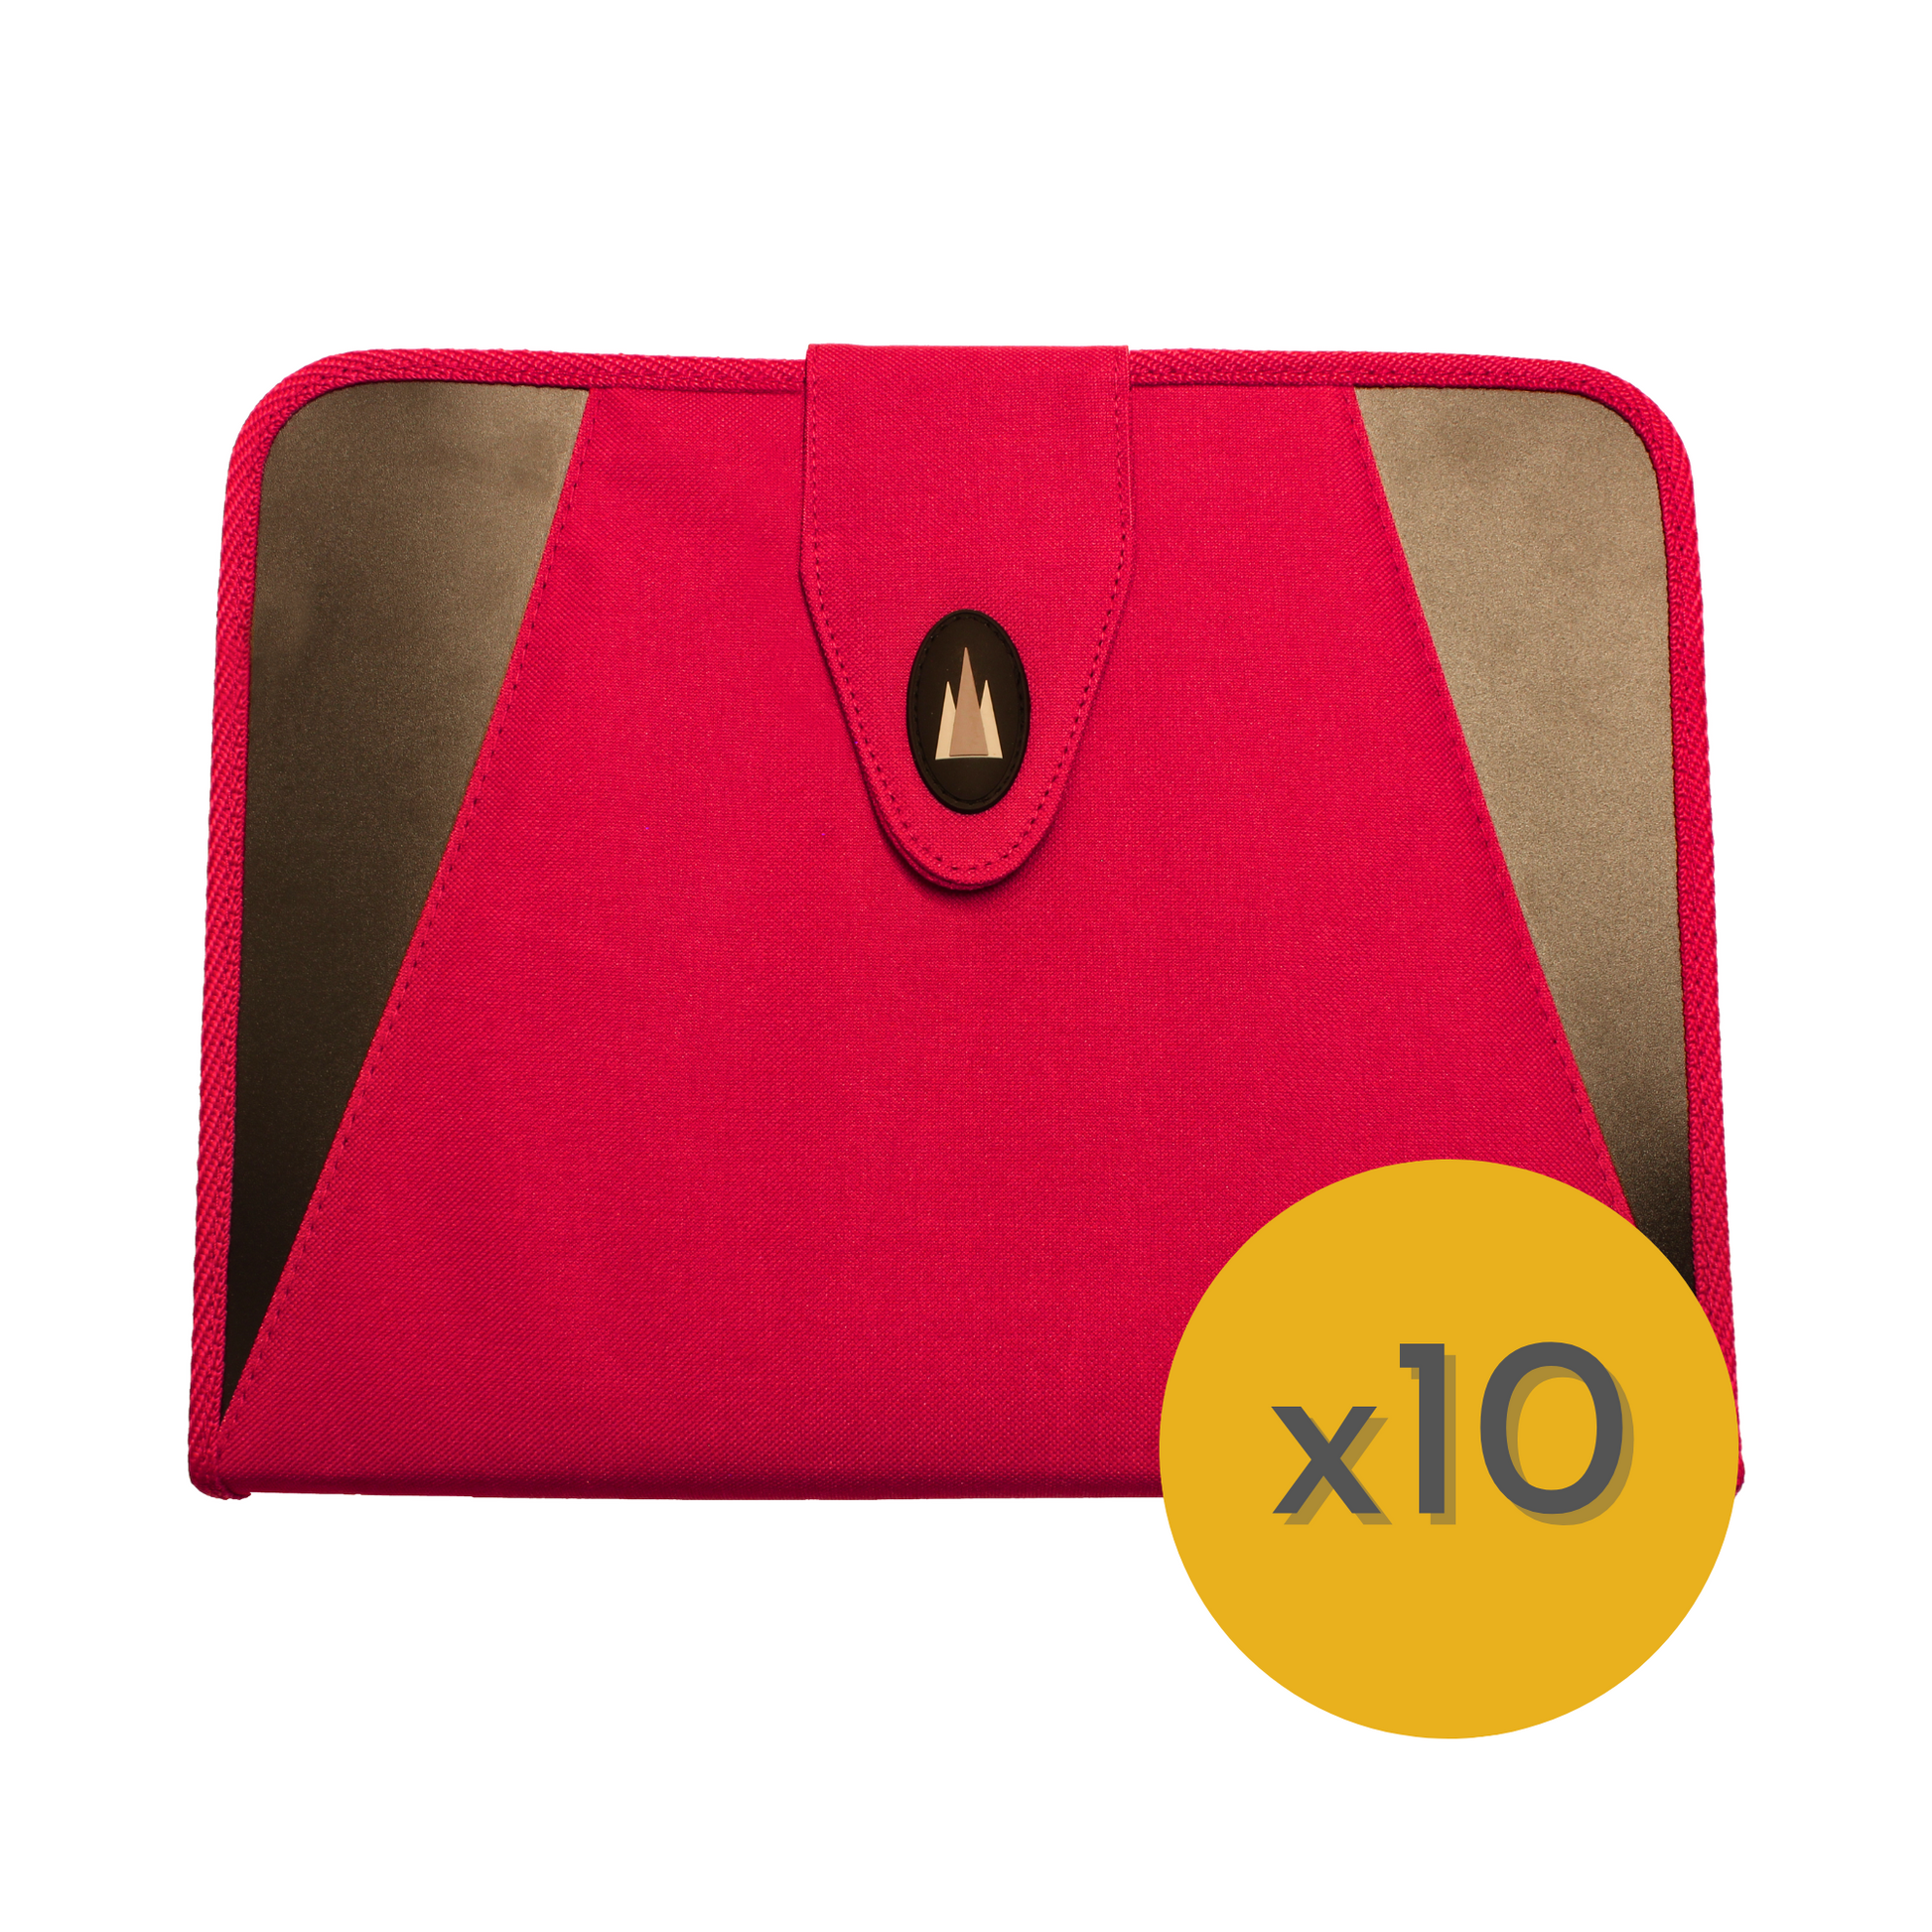 A red fabric expanding document folder with a velcro flap fastening and sturdy red binding. In the bottom right corner, a bold yellow circle with the text 'x10' indicates the featured bundle offer. The folder has a clean, professional look with a Cathedral Products logo on the velcro fastener.